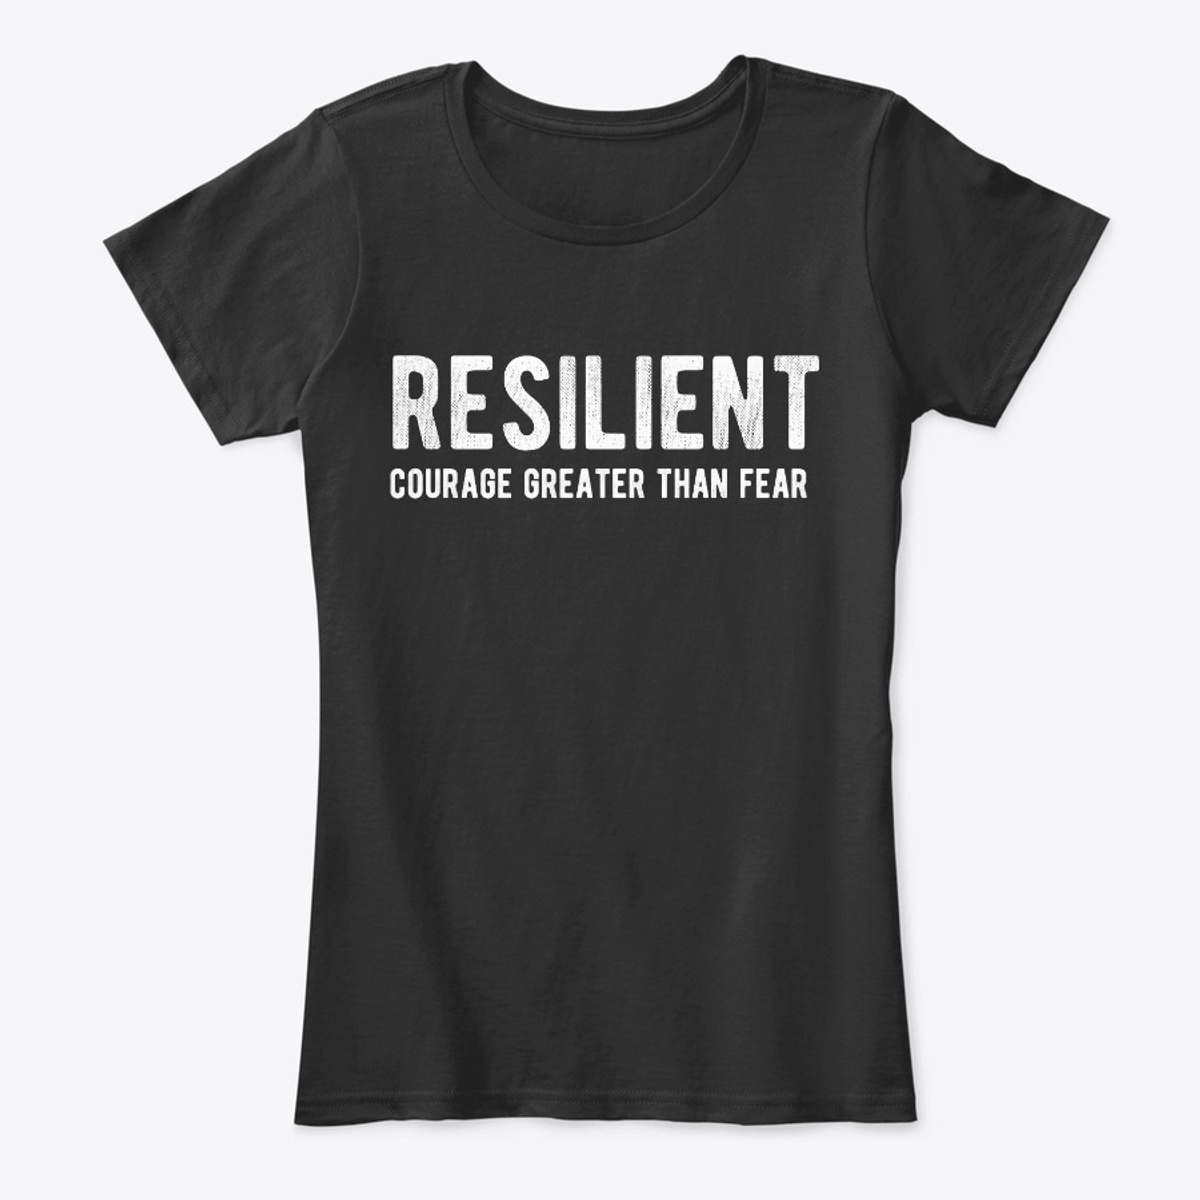 Resilient: Courage Greater Than Fear T-shirt for women and men.